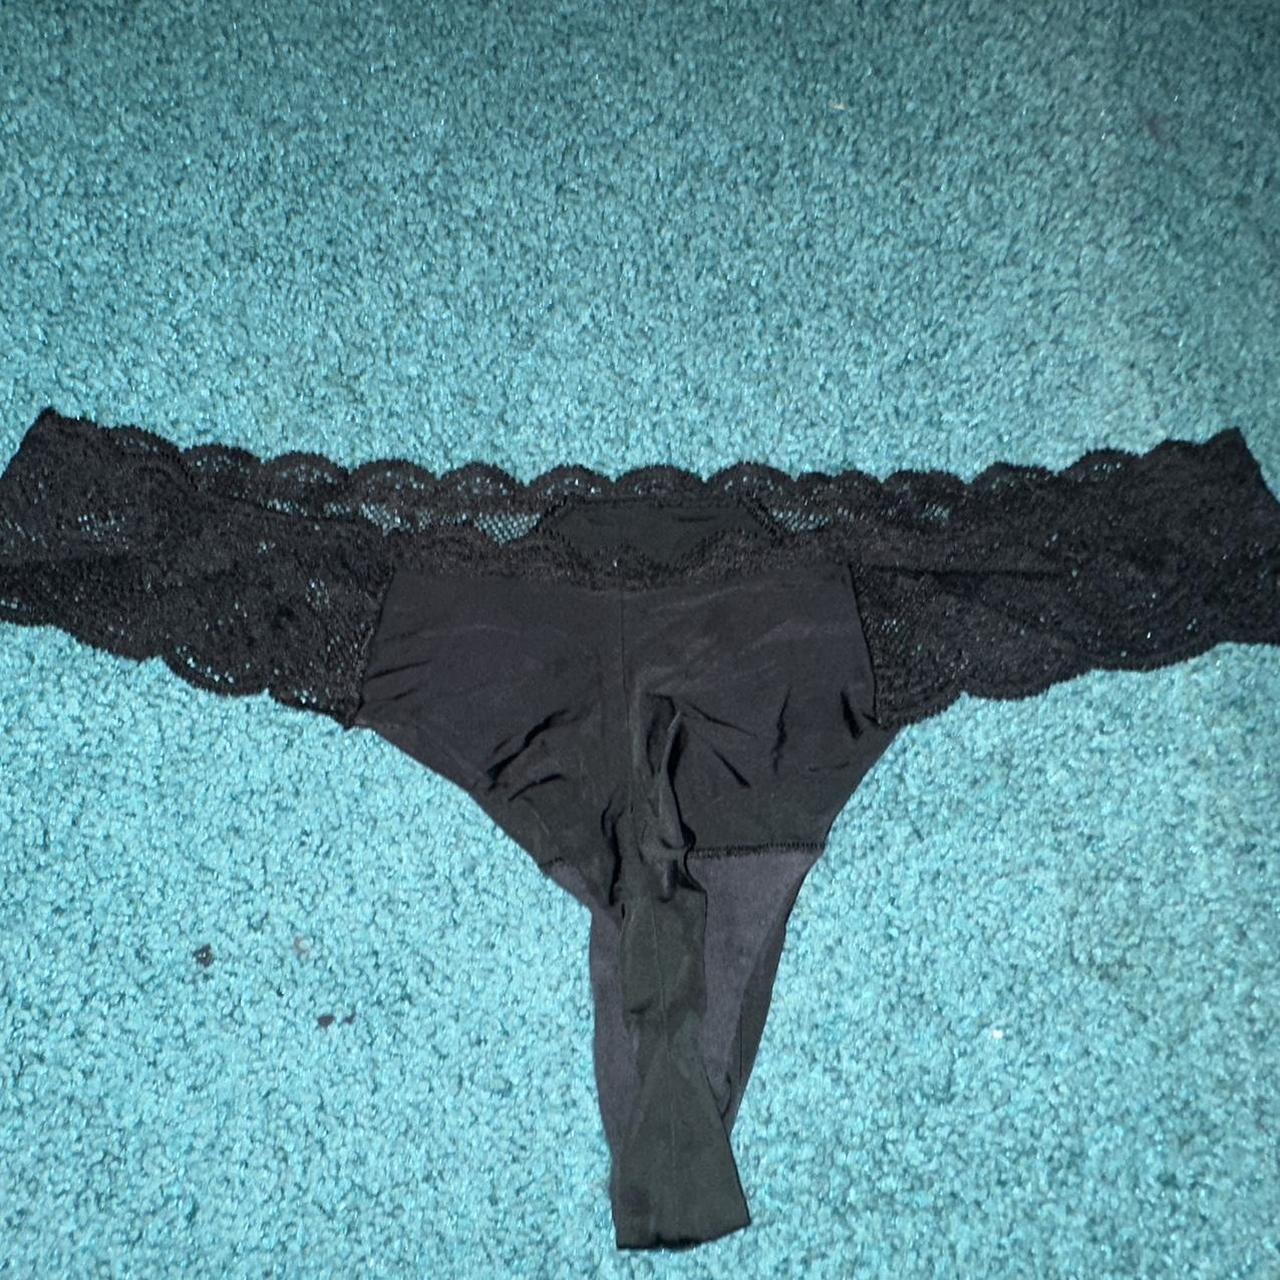 Lot of 2 thong panties from Victoria's Secret and - Depop